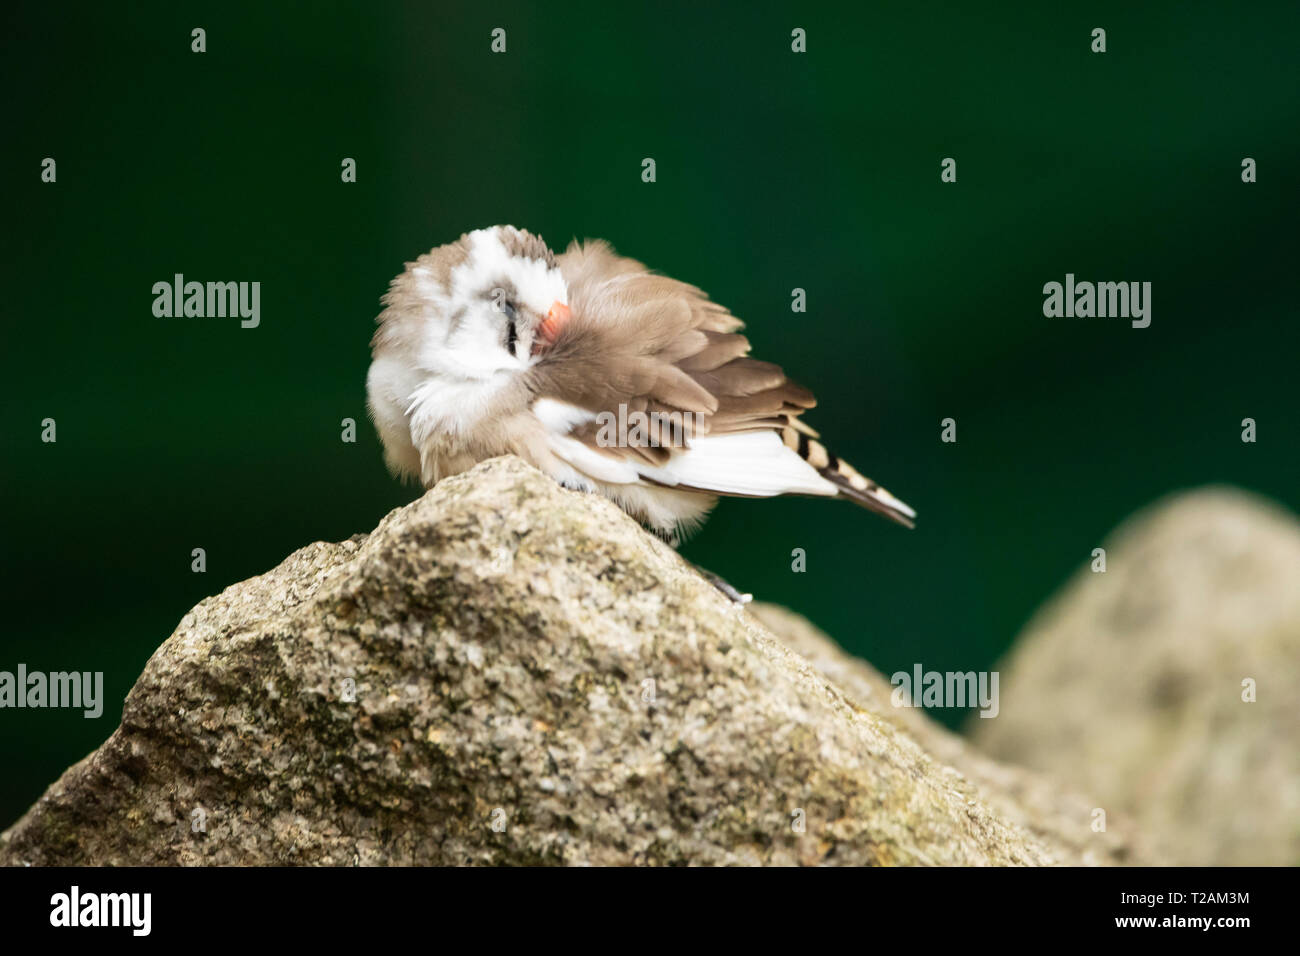 A zebra finch (Taeniopygia guttata), a bird native to Central Australia, sleeping, with feathers ruffled, perched on a rock. Stock Photo